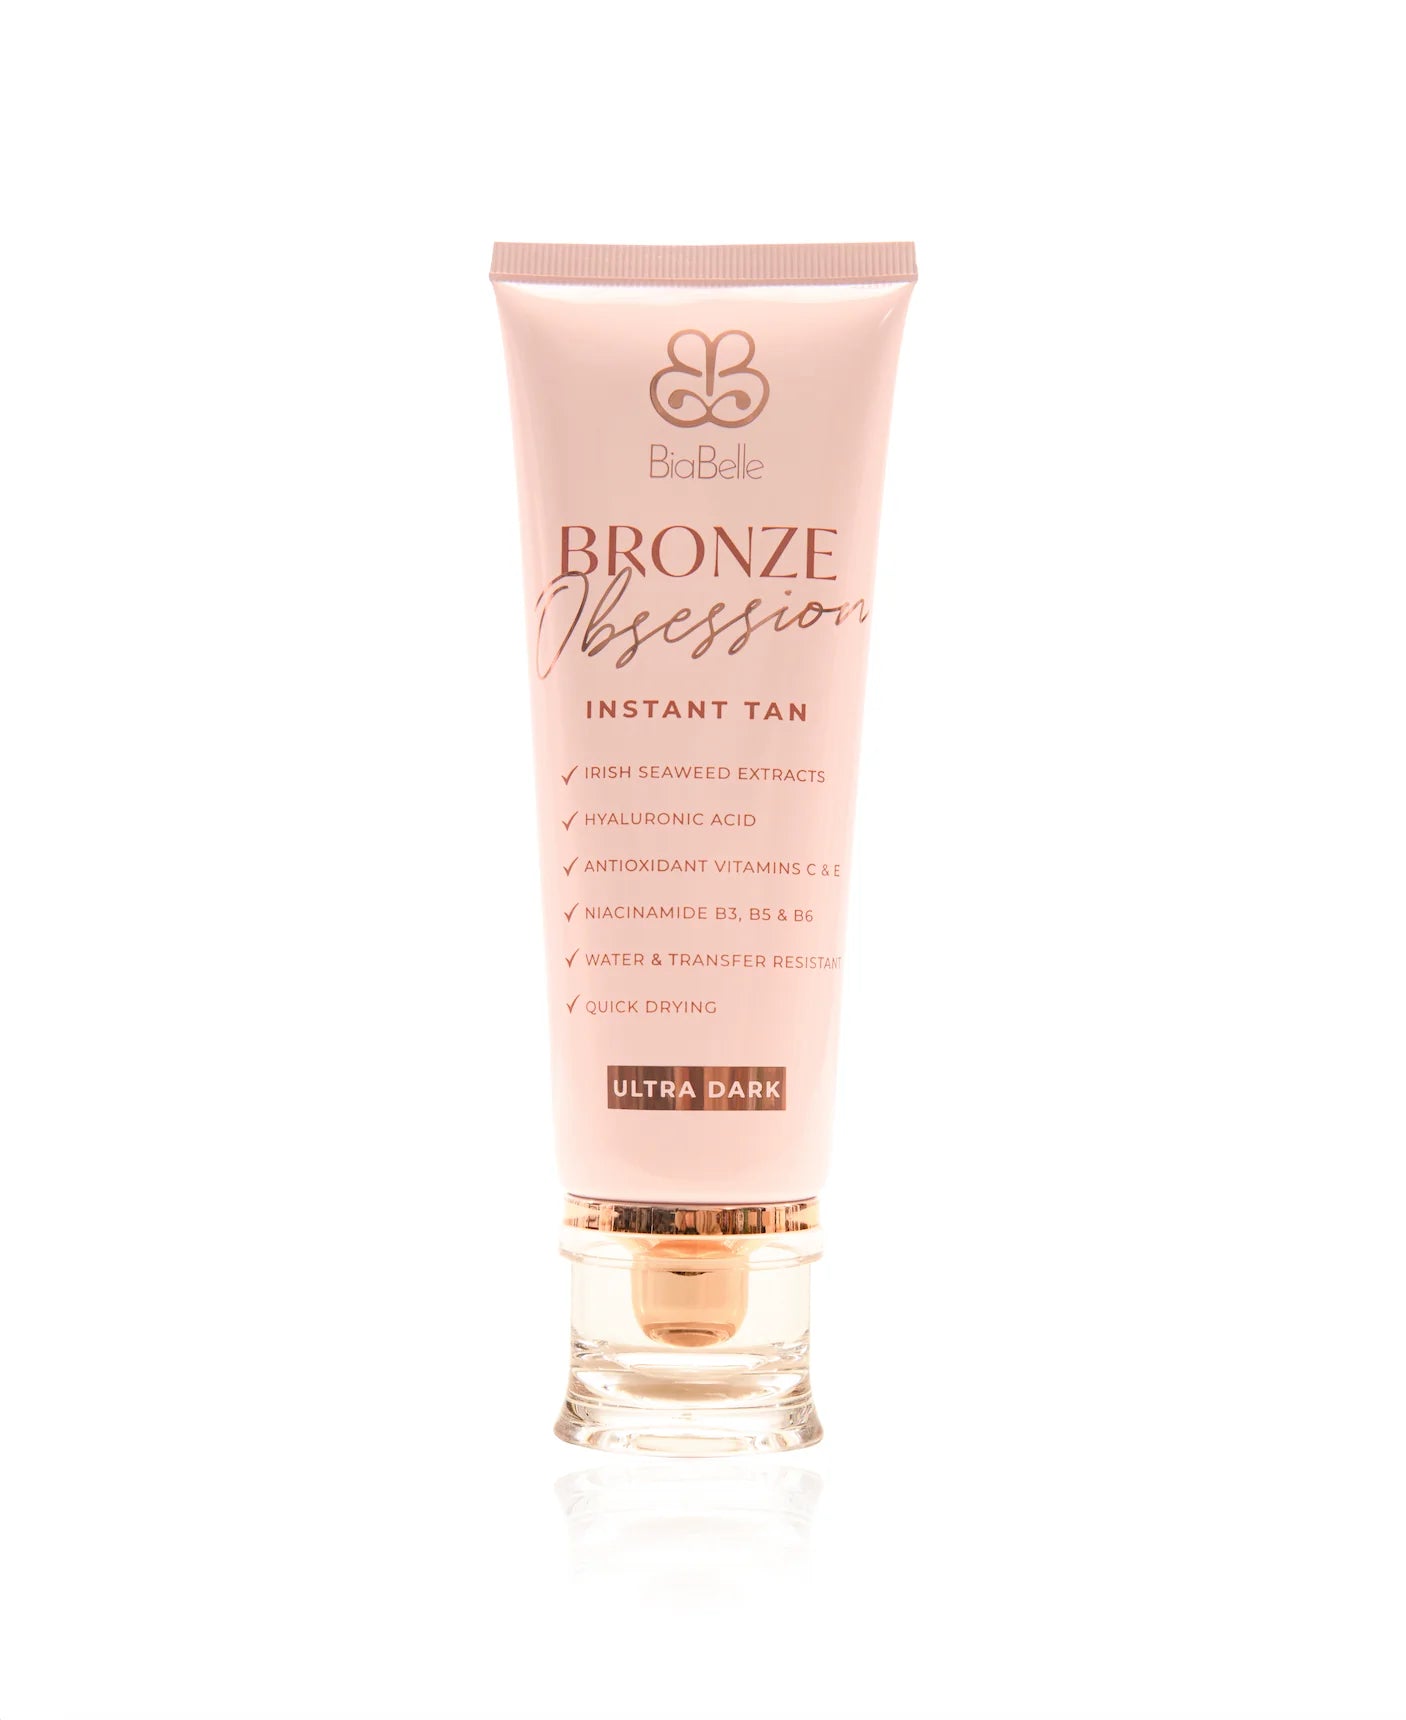 Biabelle Bronze obsession instant tan